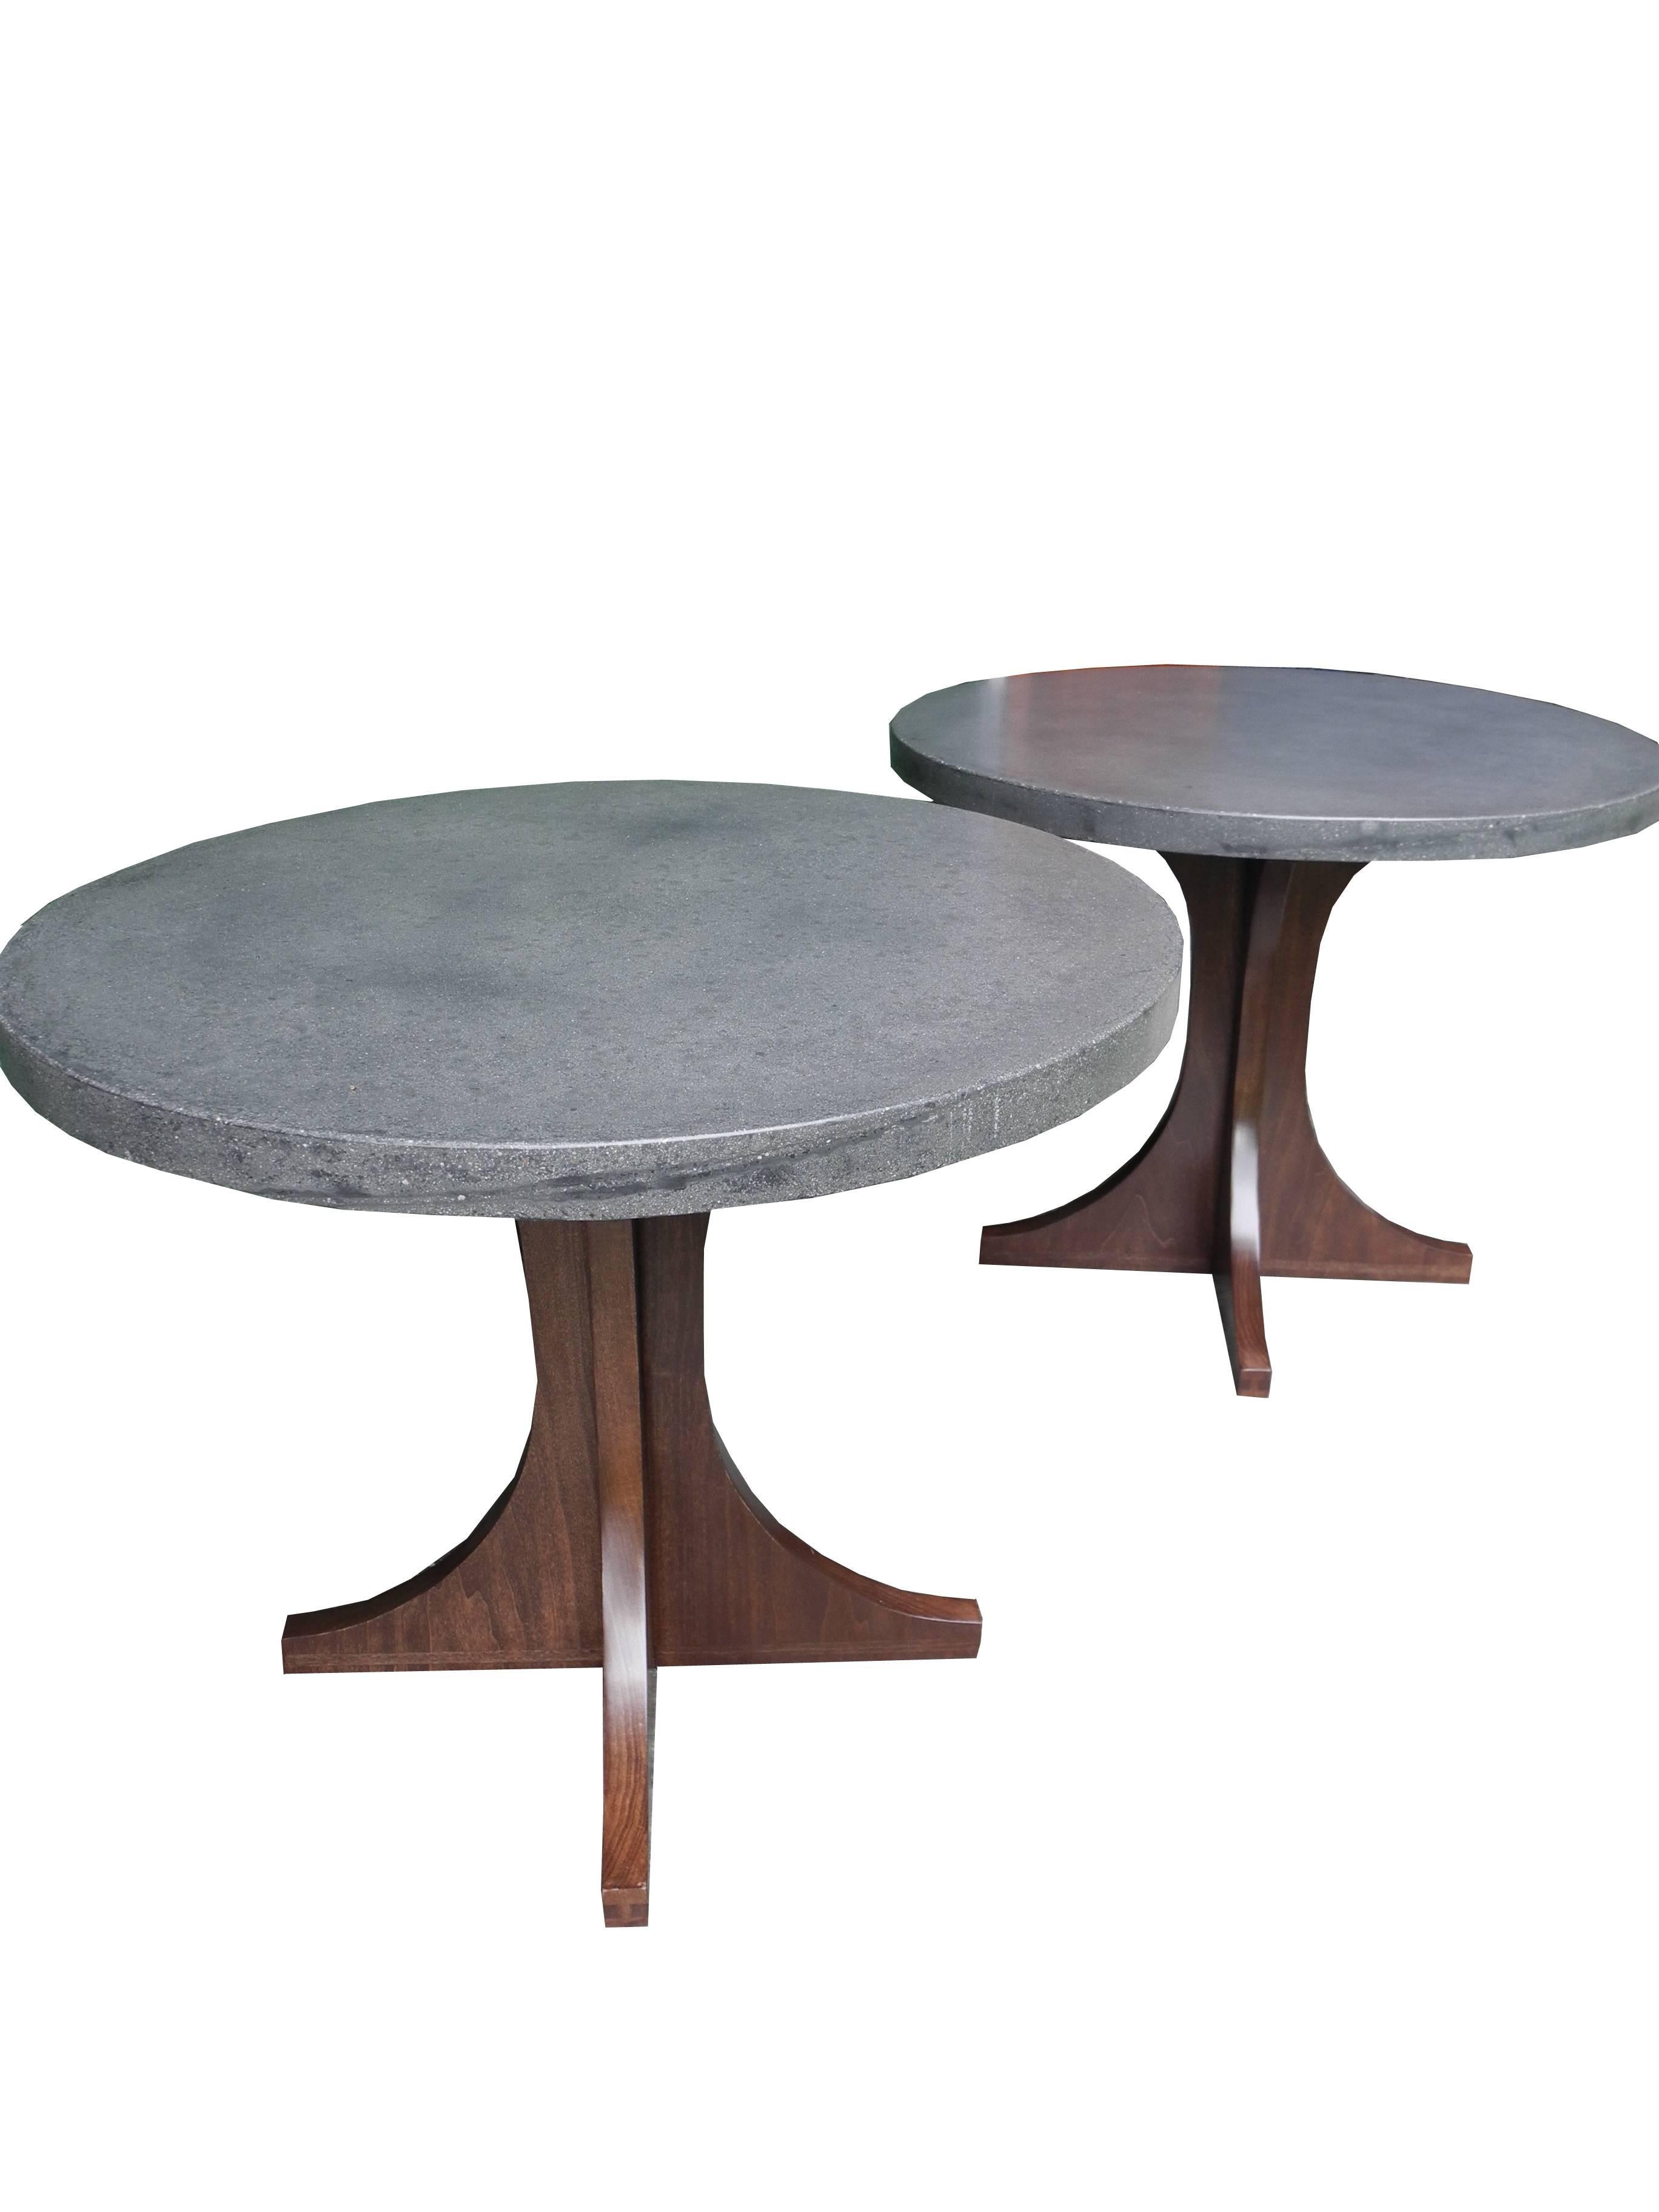 Pair of Grey Concrete and Solid Wood Side Tables/Nightstands by CR Design 1